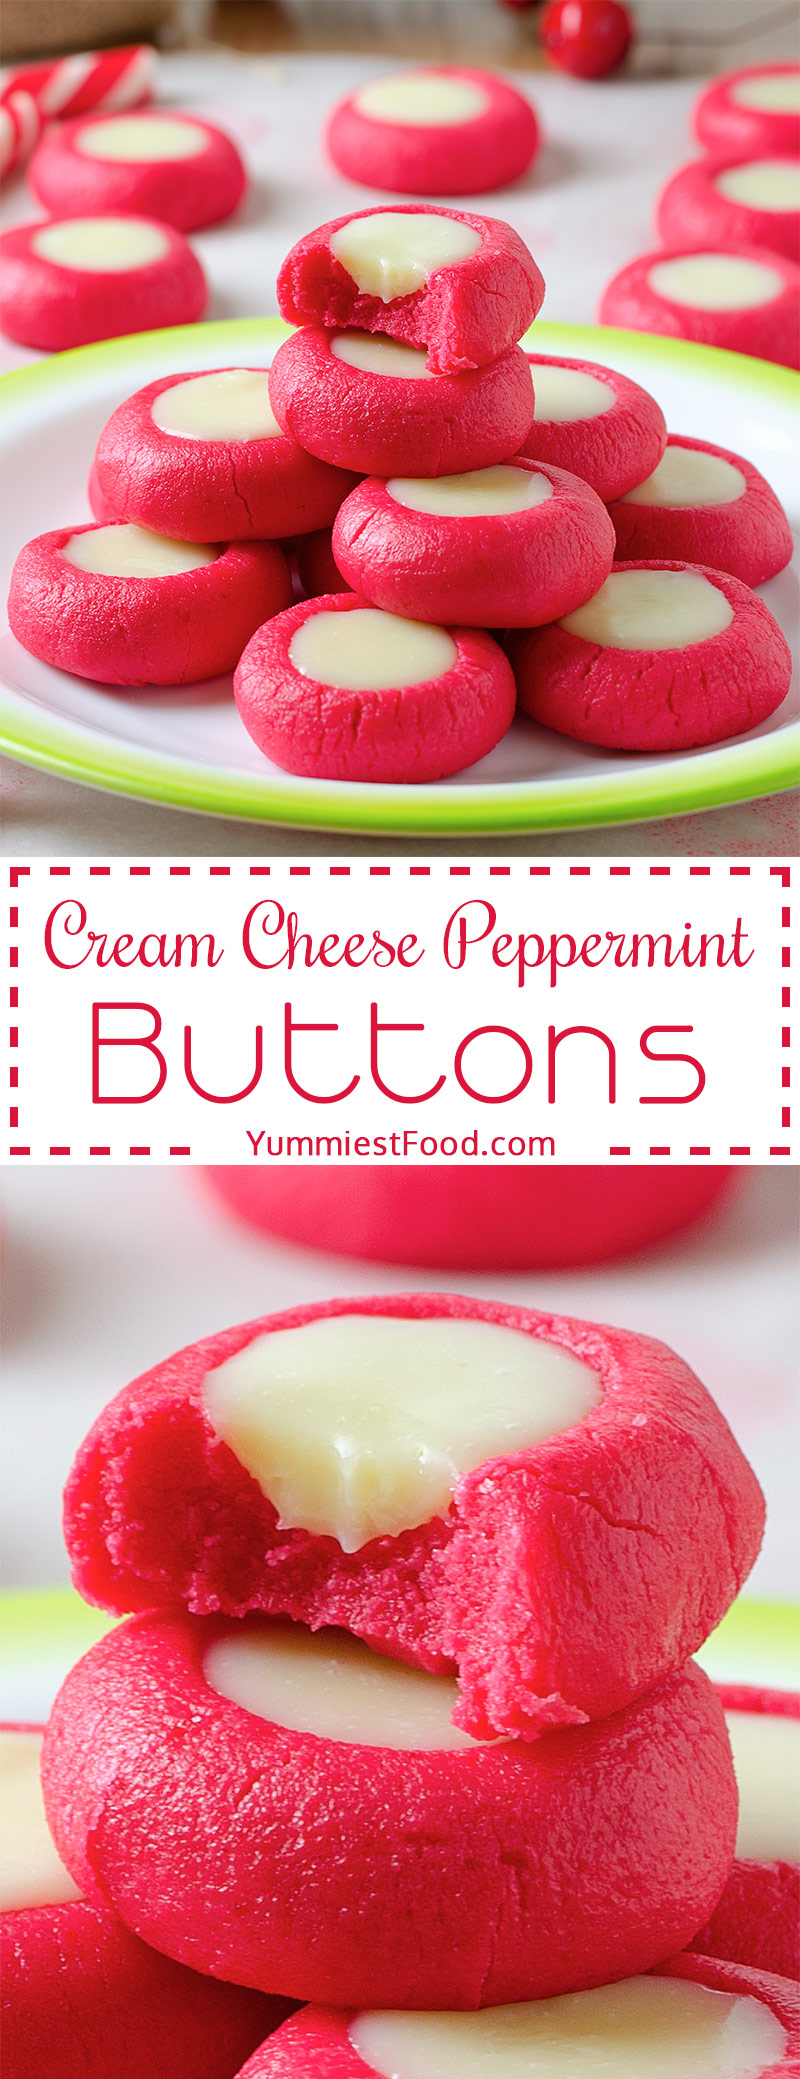 CREAM CHEESE PEPPERMINT CHRISTMAS BUTTONS - Super Easy to make Christmas Recipe, fantastically festive and always a hit with kids and adults alike